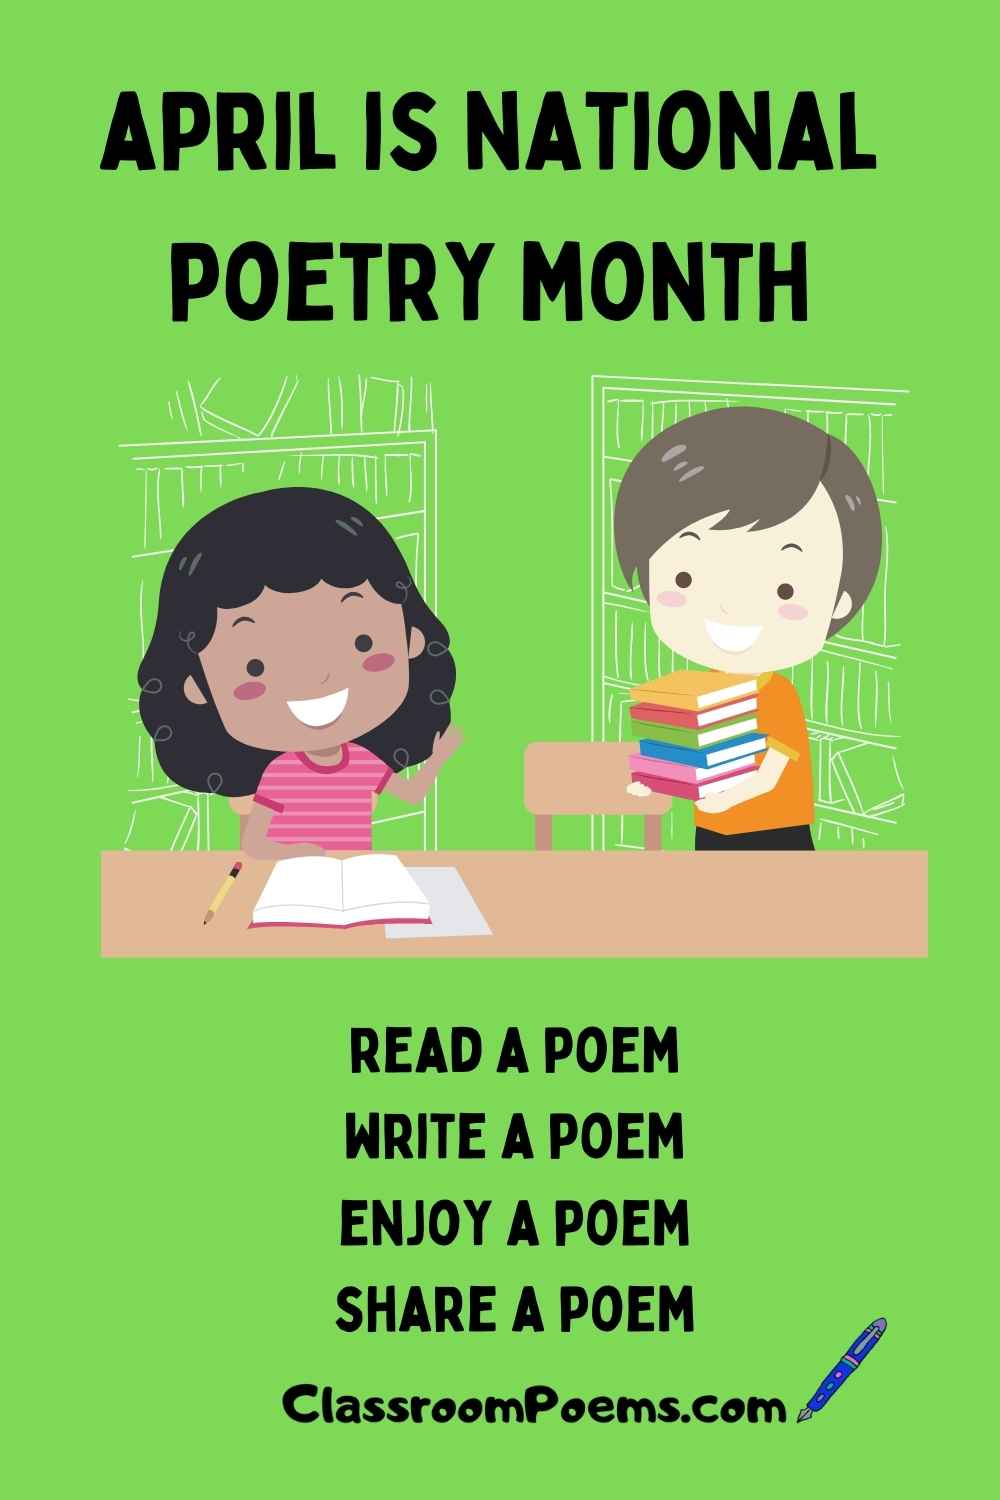 April is Poetry Month, Share a poem for poetry month, national poetry month, classroompoems.com